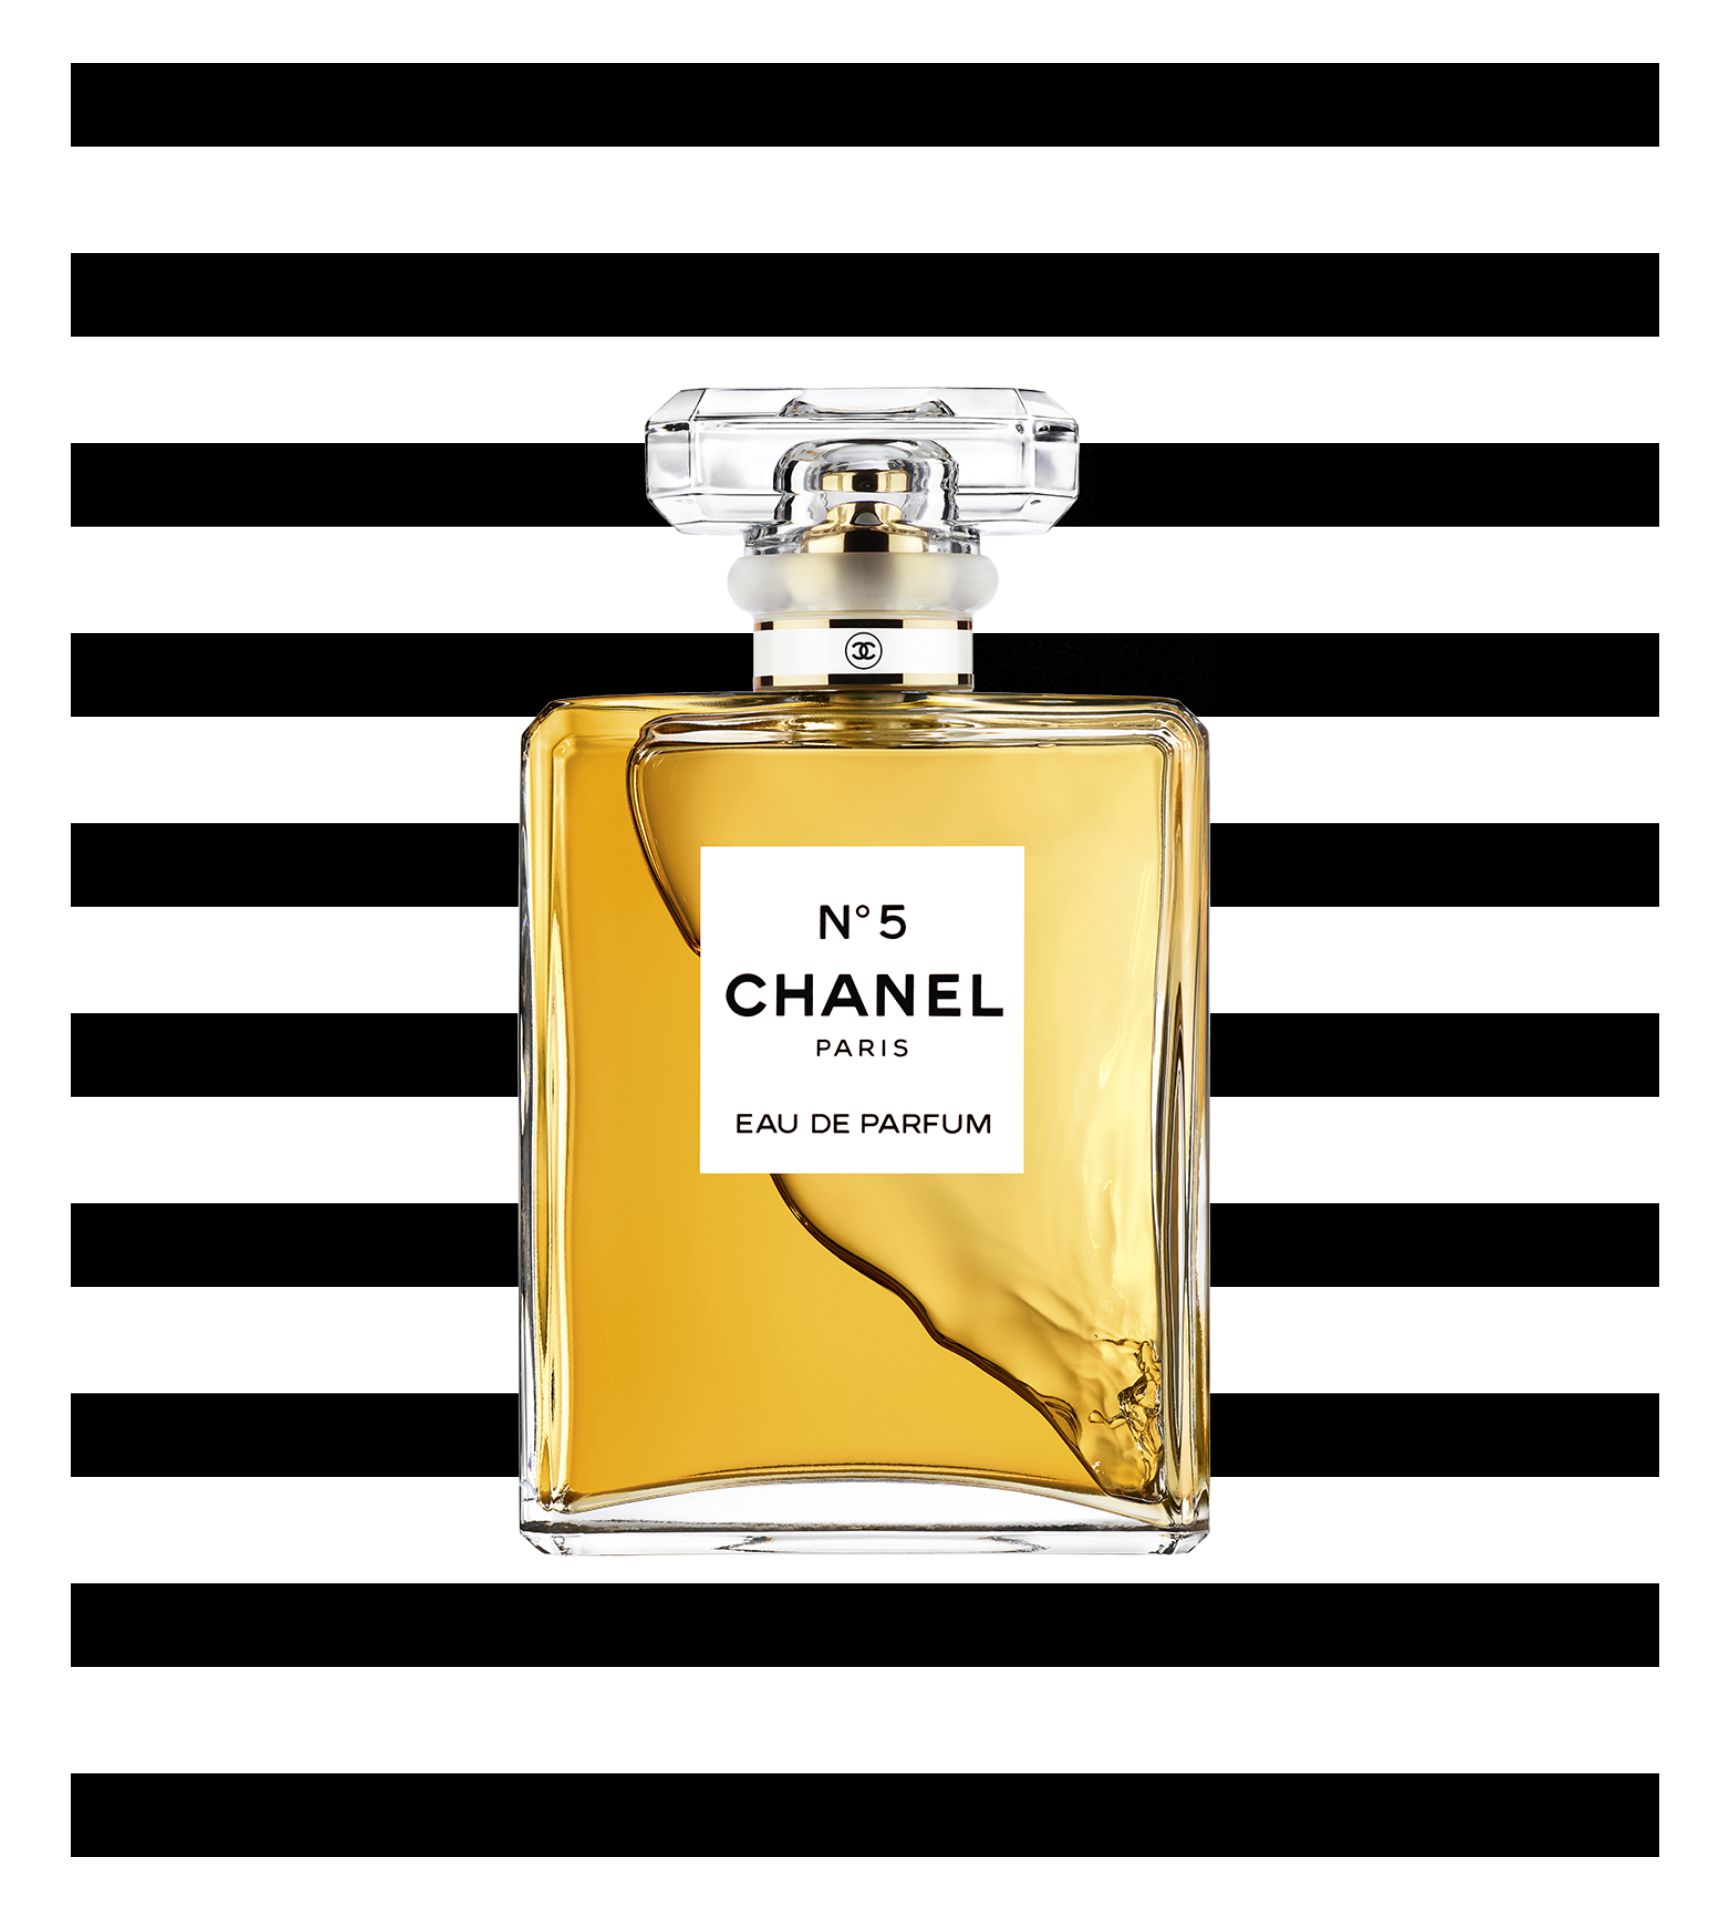 chanel-printable-images